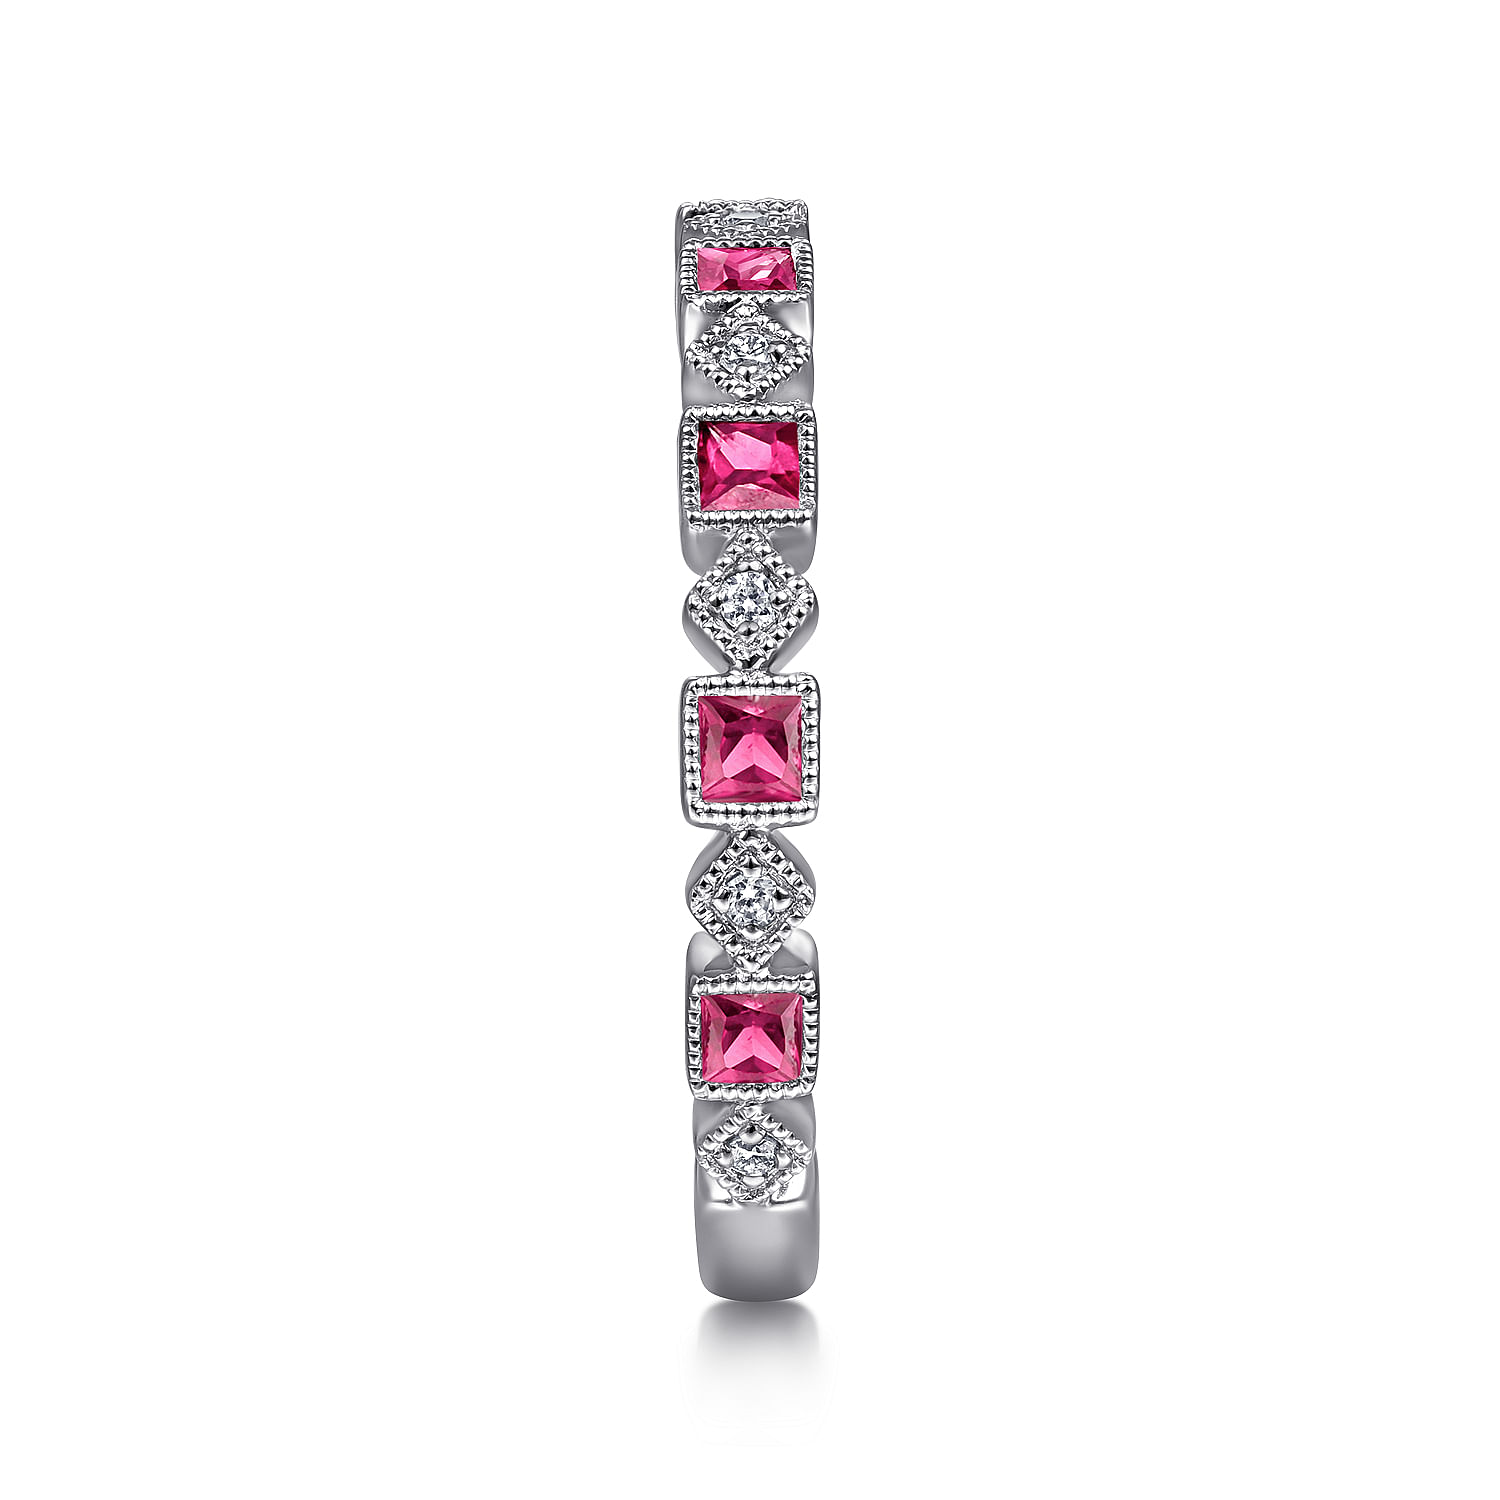 14K White Gold Geometric Ruby and Diamond Stackable Ring